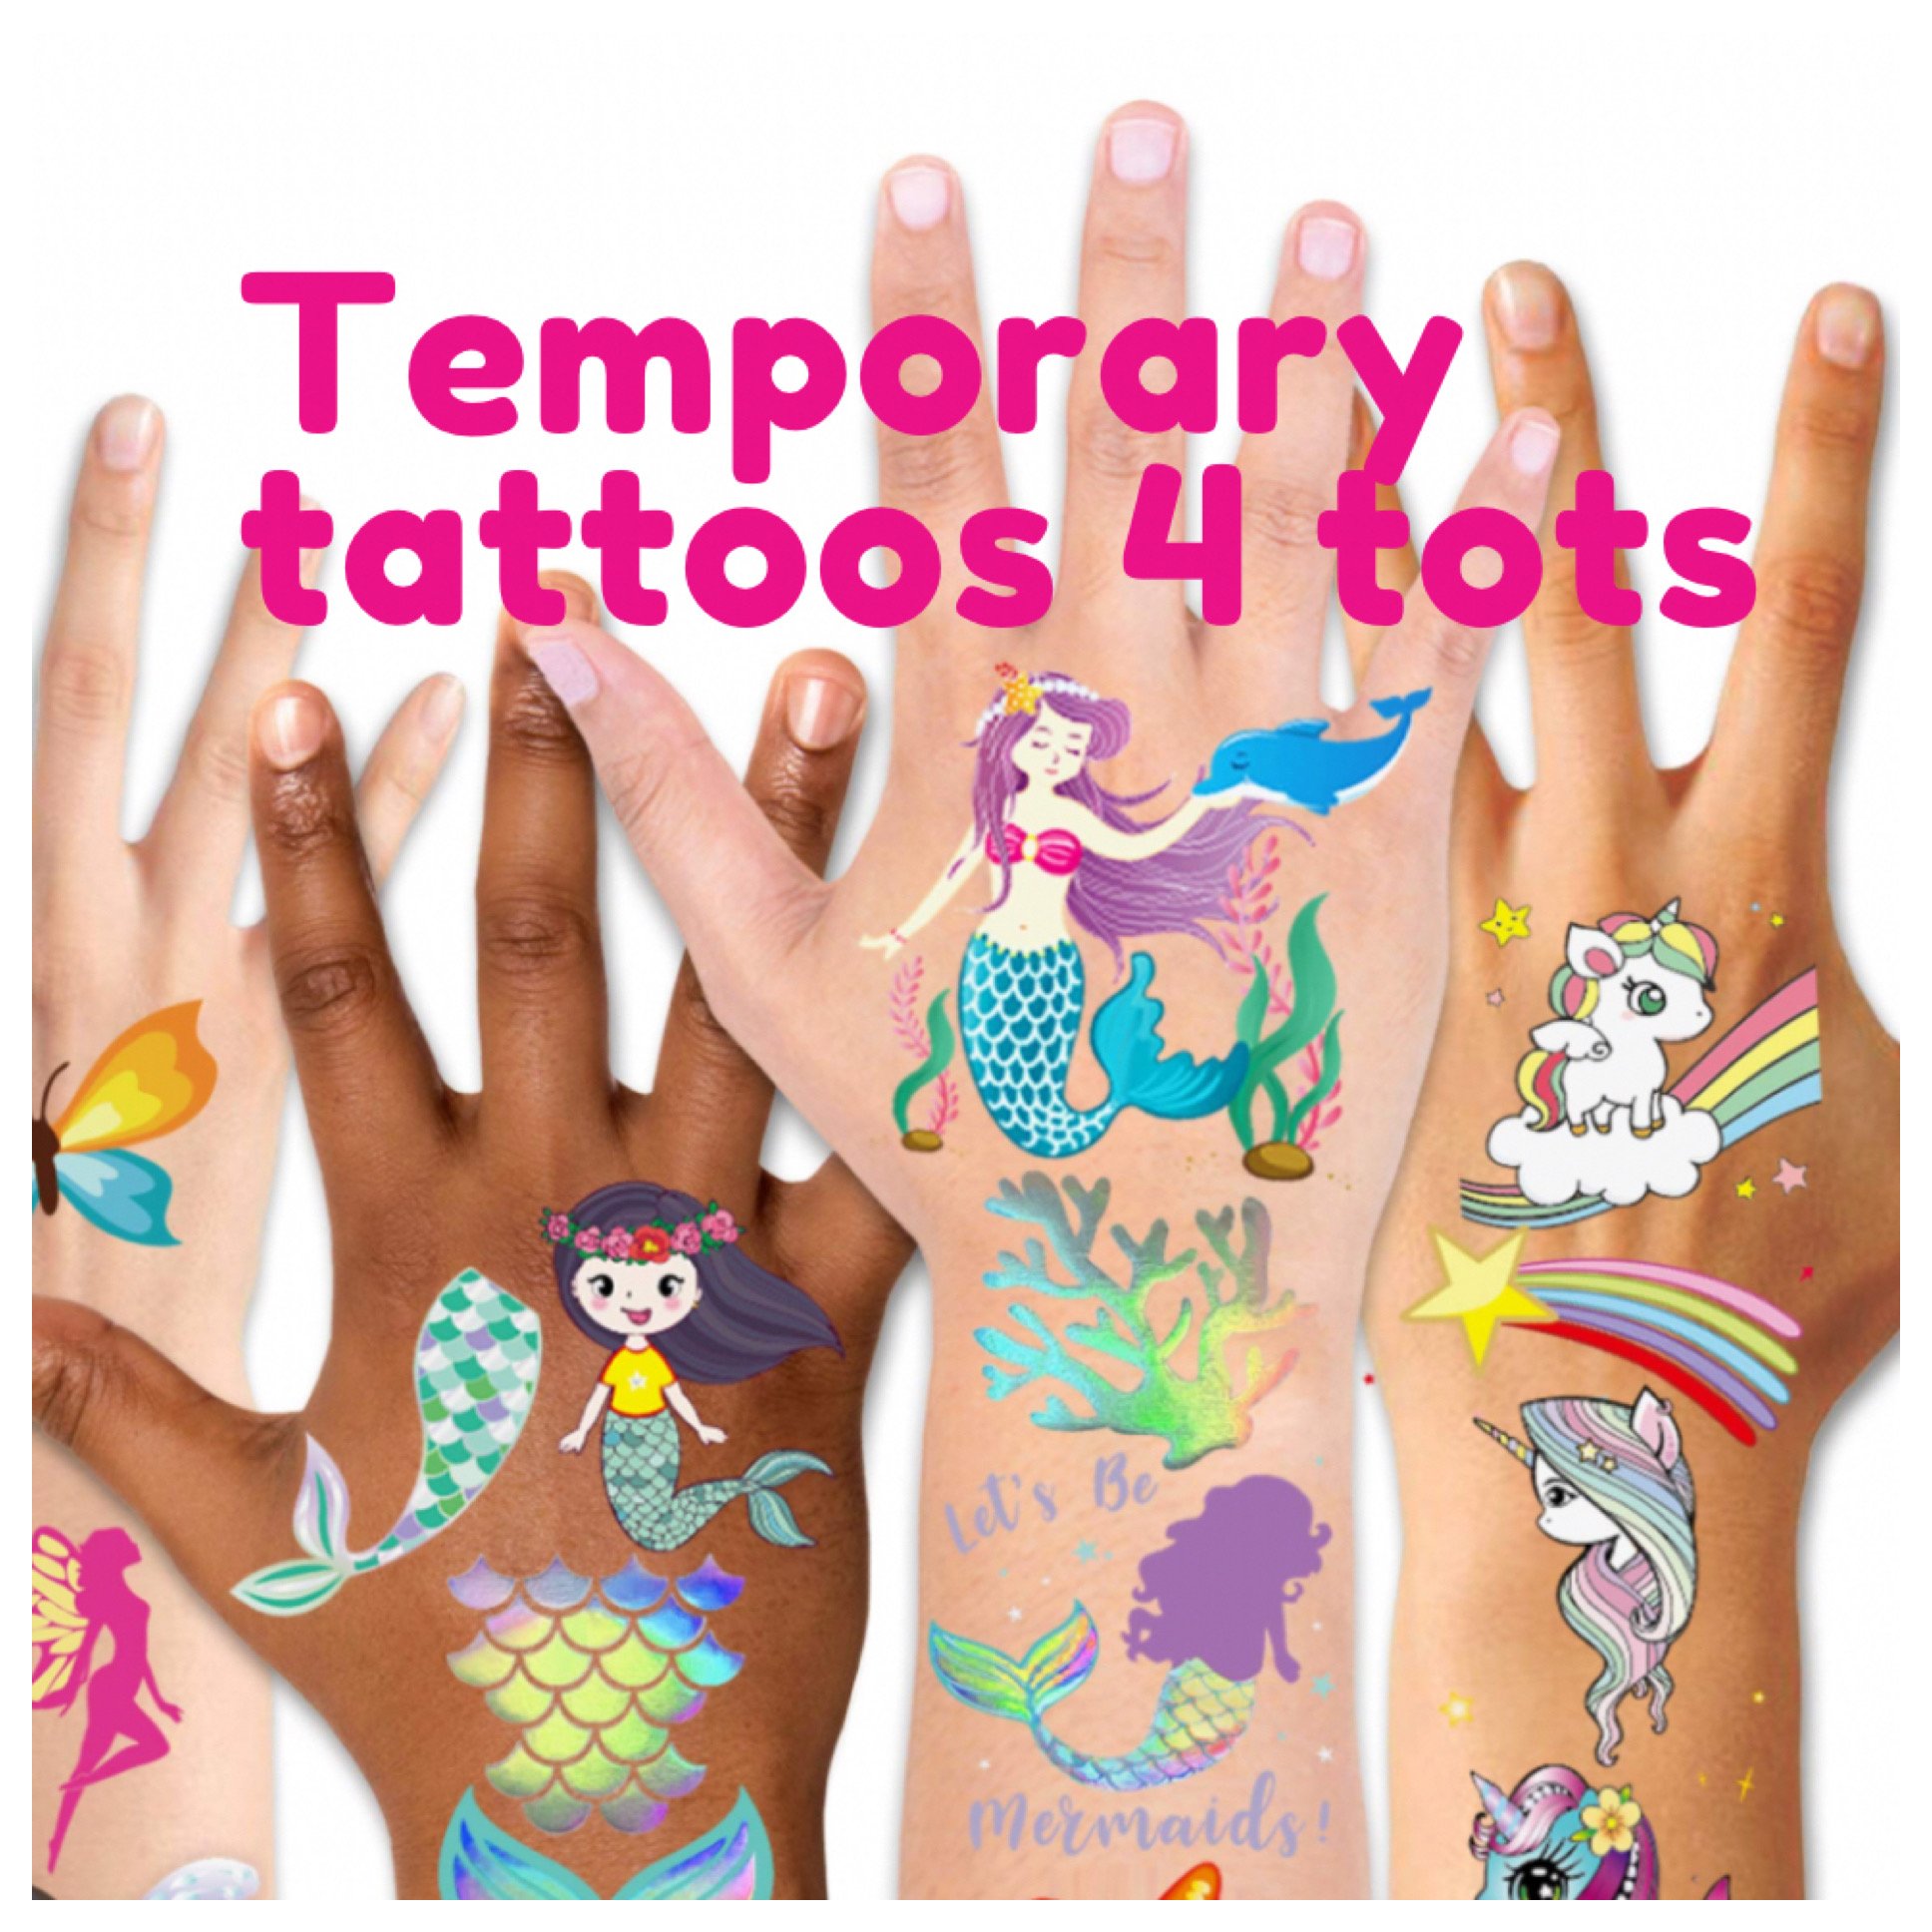 Temporary tattoos for kids's events